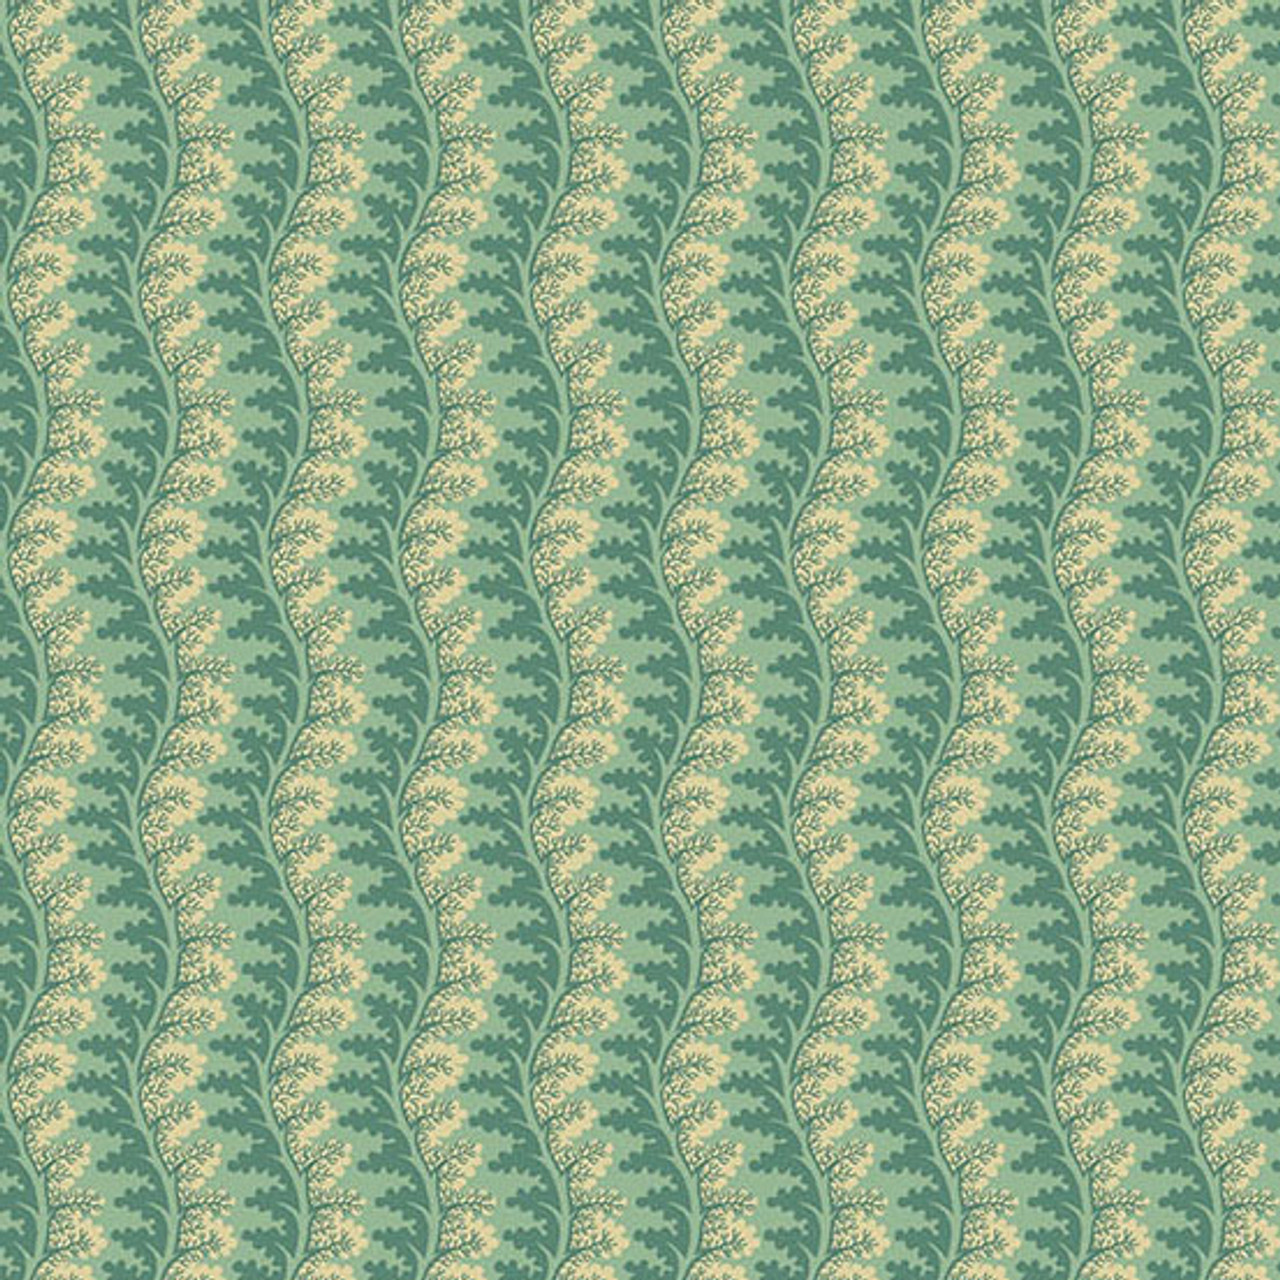 Oak Alley by Di Ford Hall : Serpentine - Teal